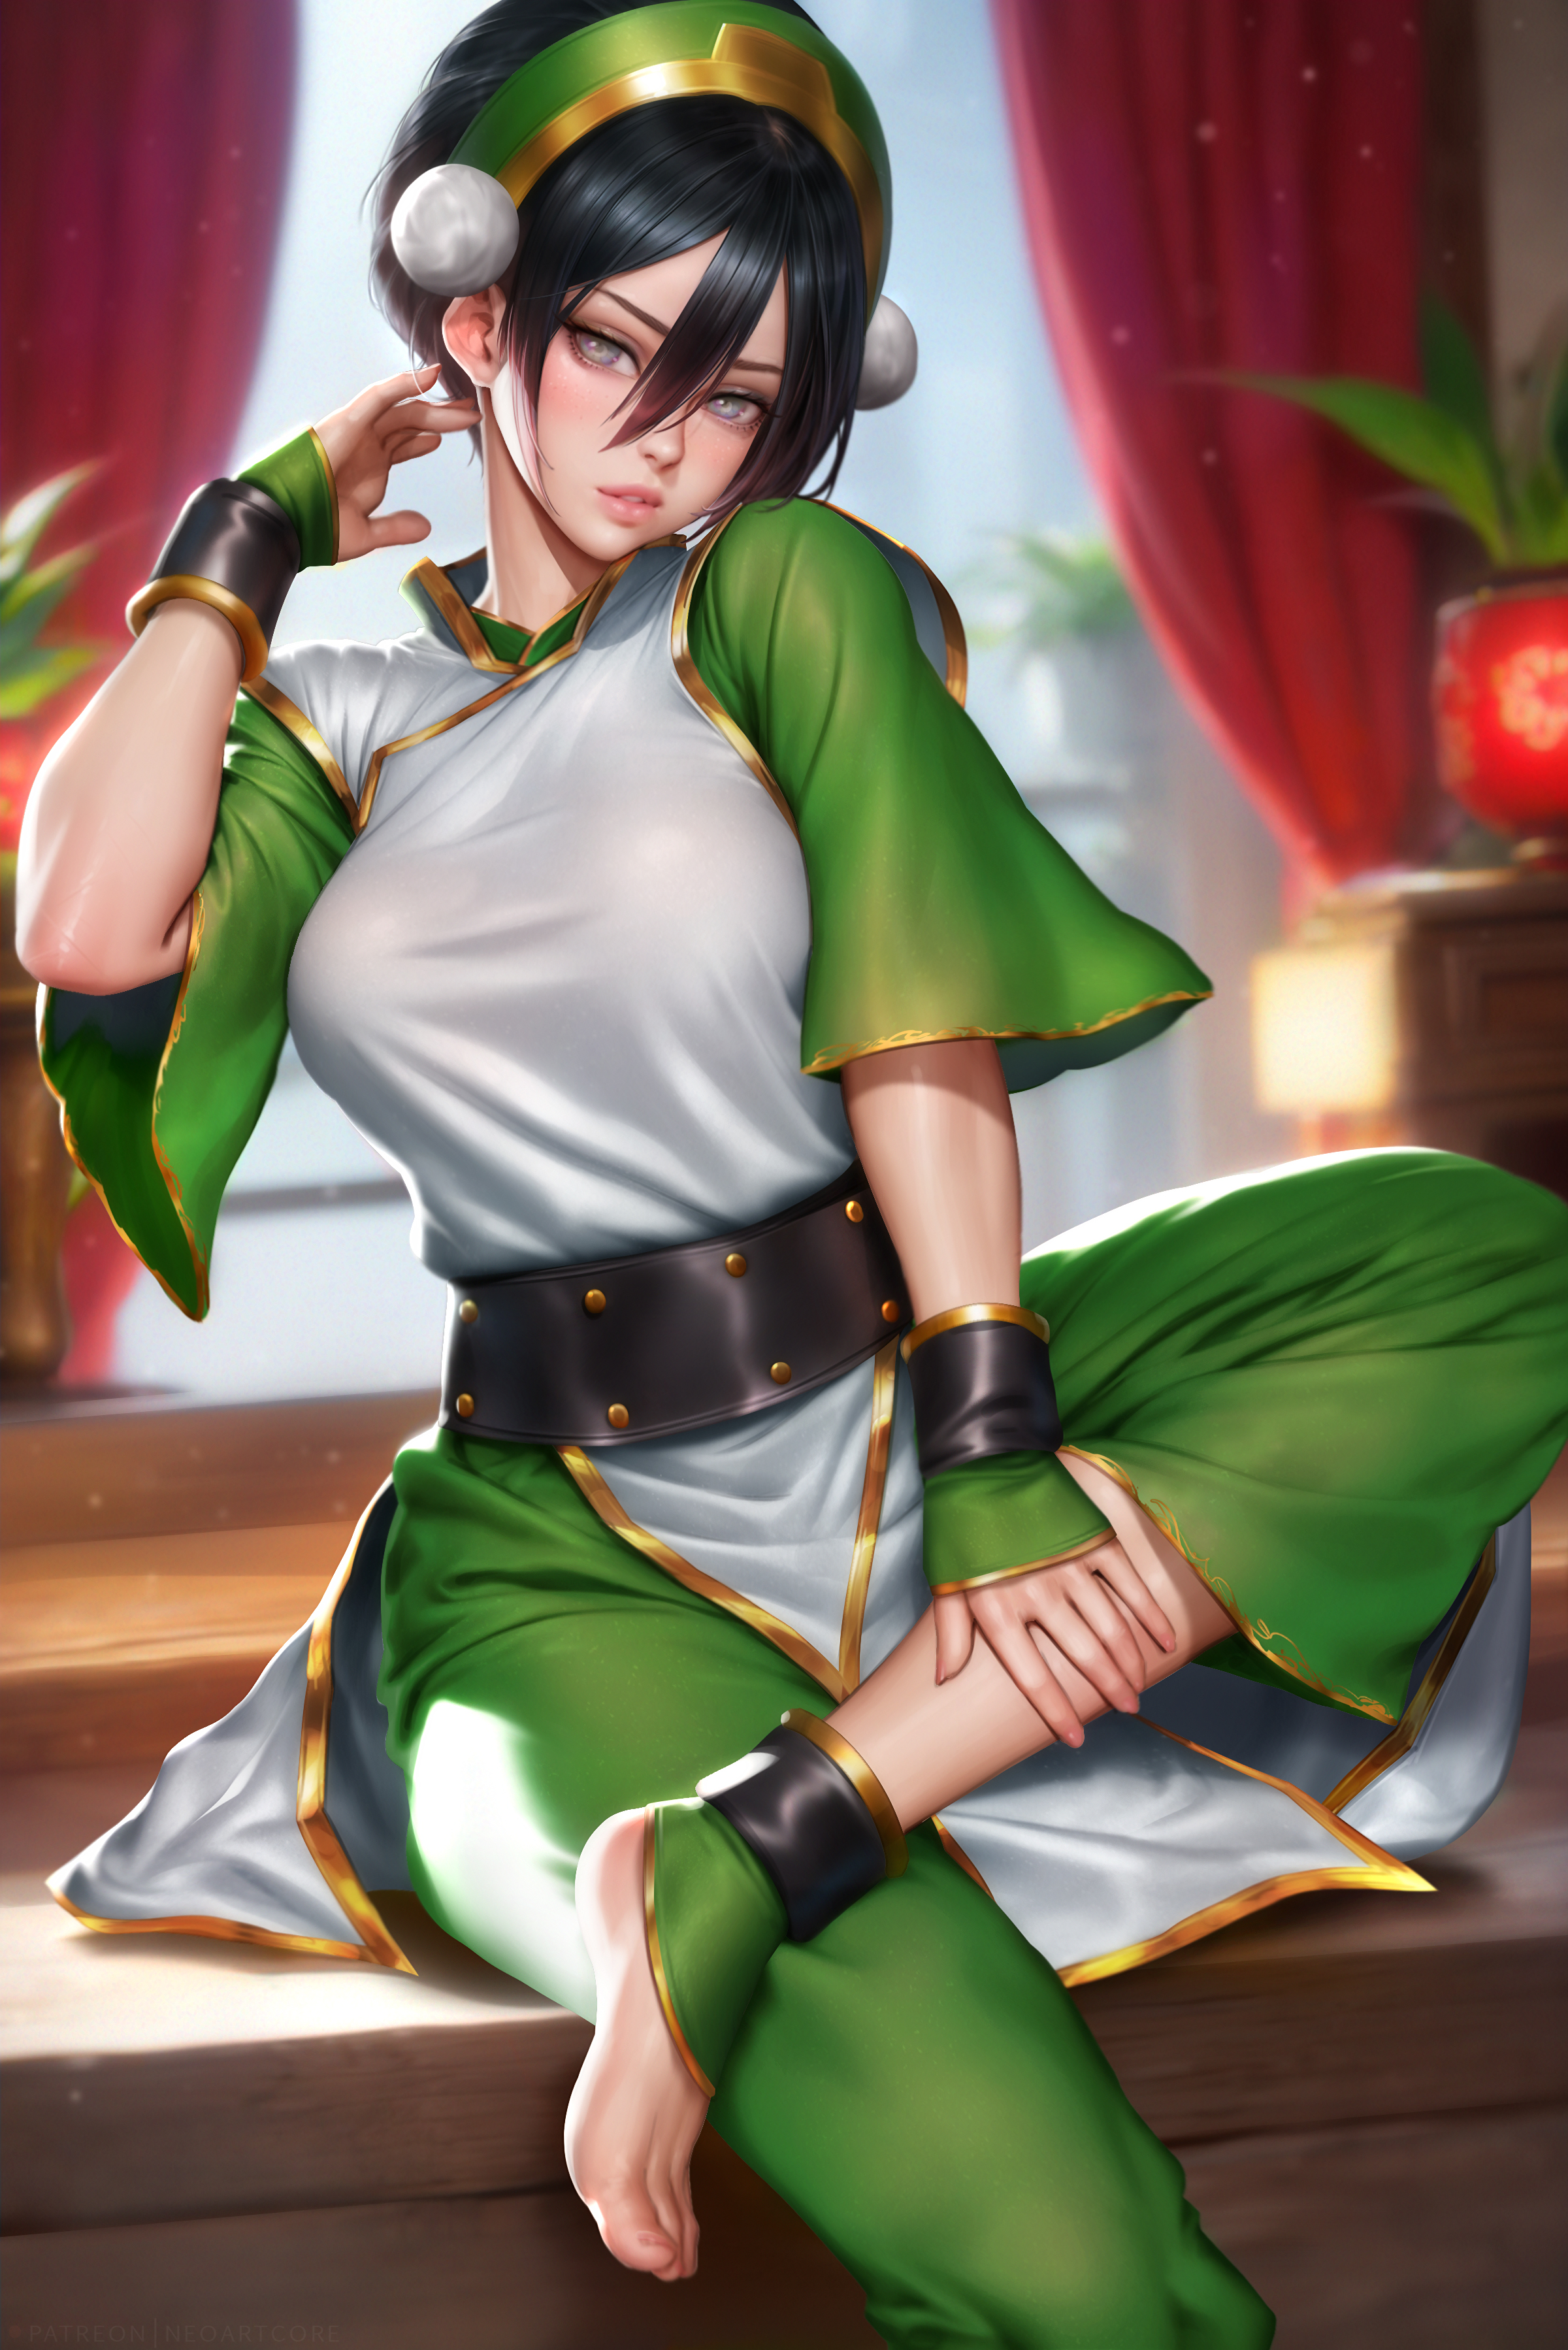 Avatar The Last Airbender Toph Beifong 2 HD Anime Wallpapers  HD Wallpapers   ID 36948